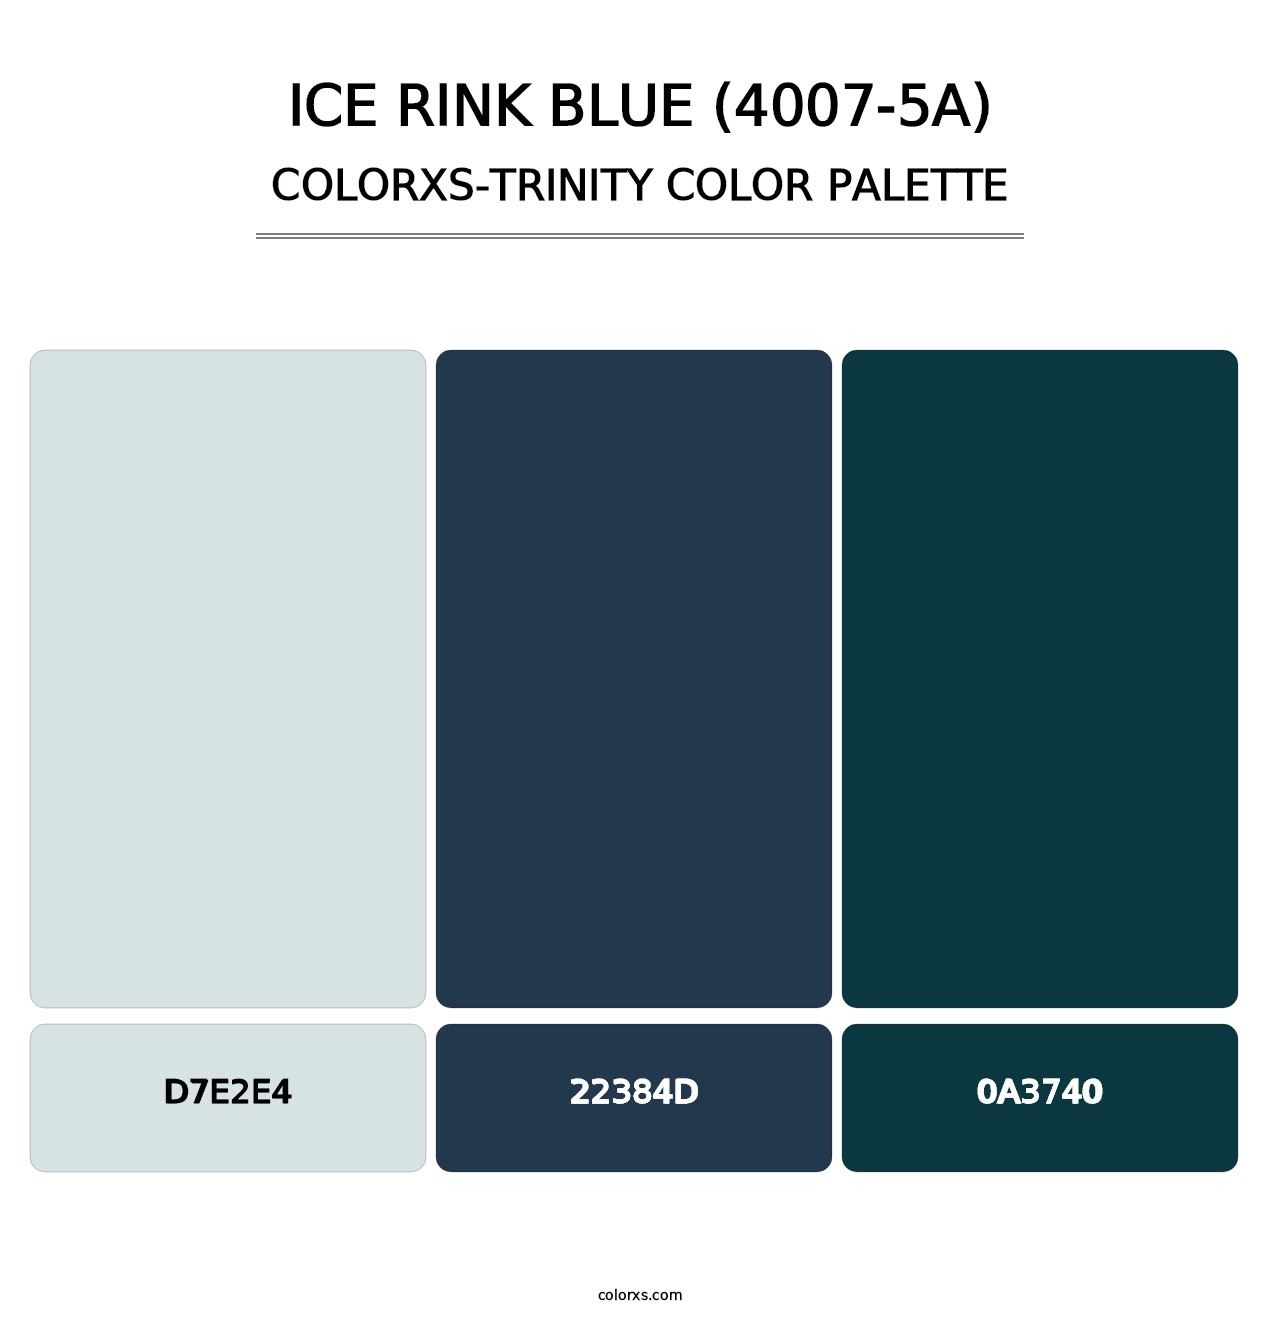 Ice Rink Blue (4007-5A) - Colorxs Trinity Palette